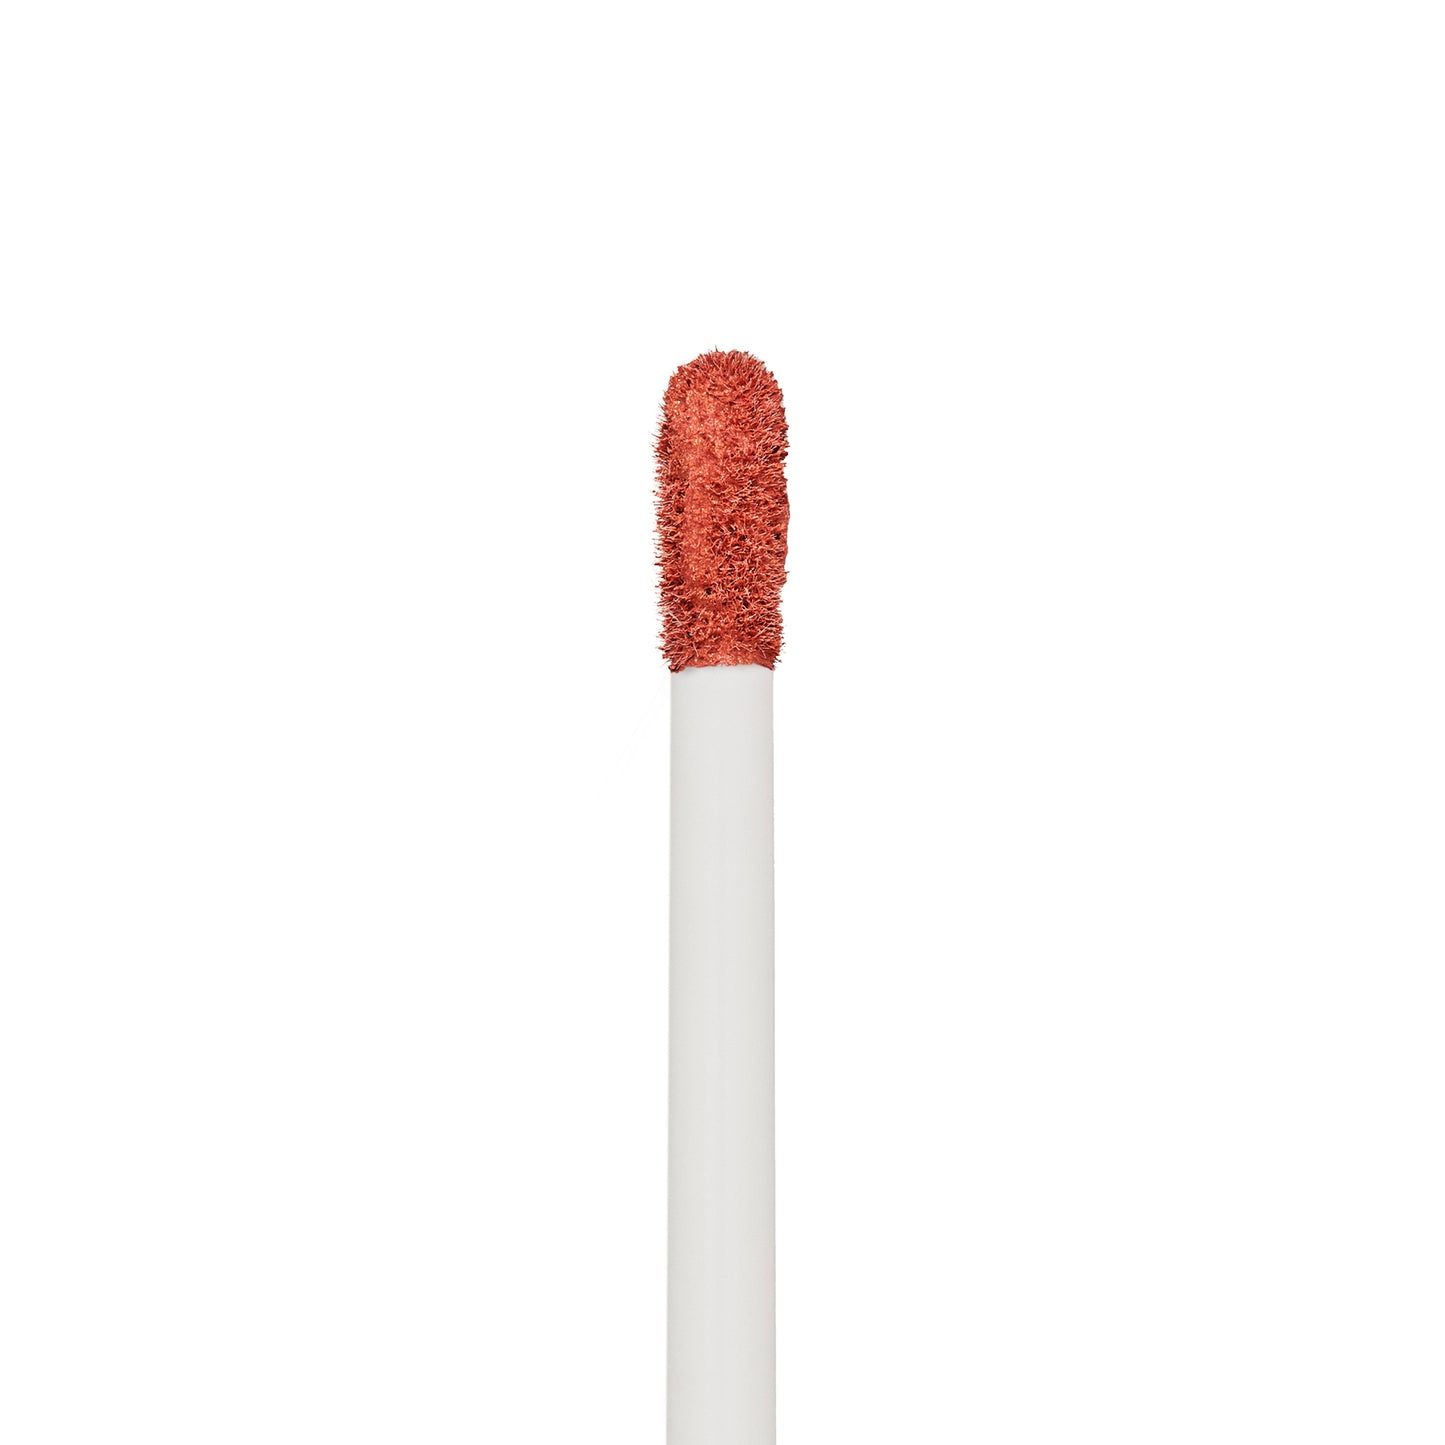 Load image into Gallery viewer, Stila - Stay All Day Liquid Lipstick - Shimmer - Patricia Shimmer
